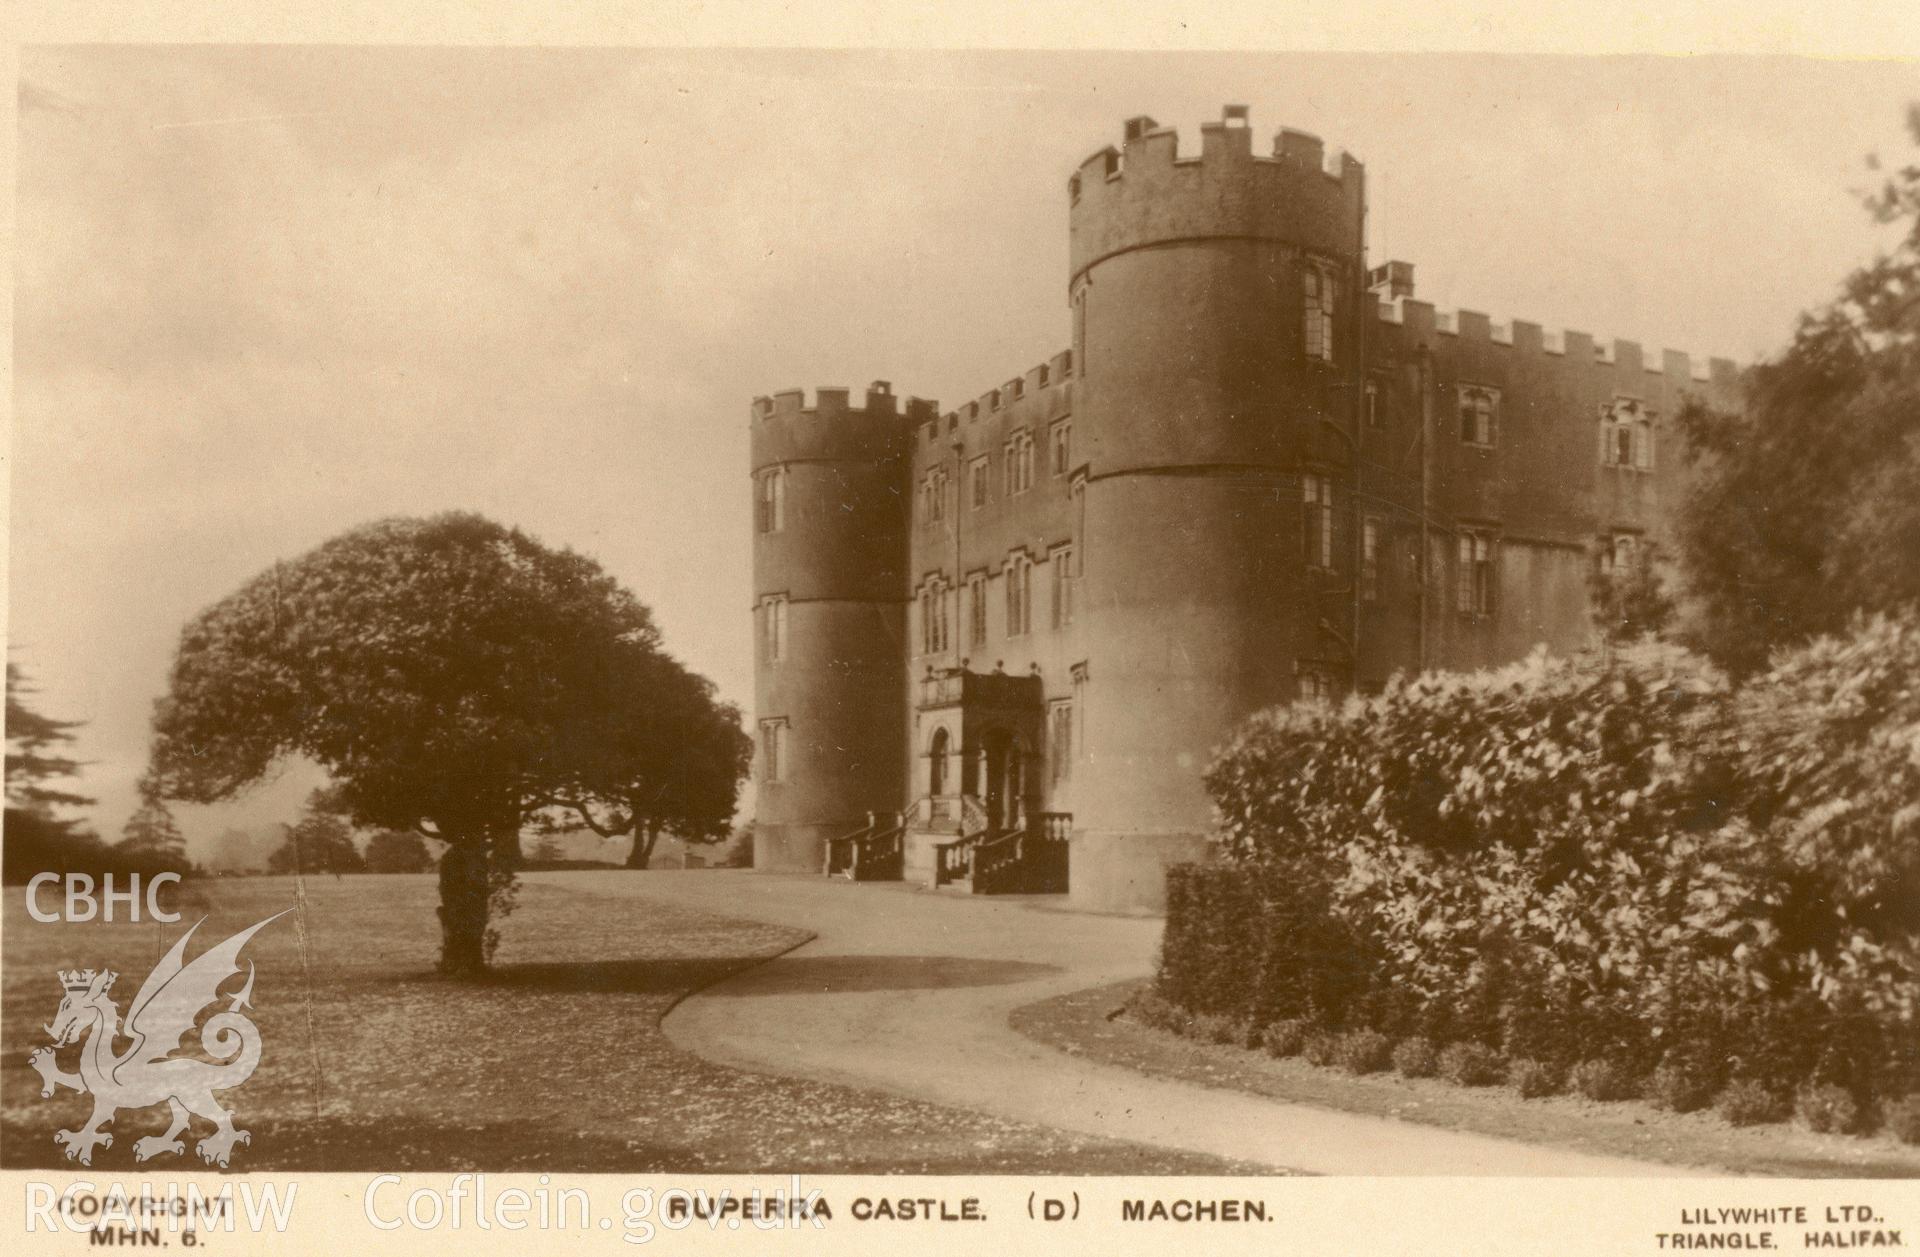 Digitised postcard image of Ruperra Castle, Draethen. Produced by Parks and Gardens Data Services, from an original item in the Peter Davis Collection at Parks and Gardens UK. We hold only web-resolution images of this collection, suitable for viewing on screen and for research purposes only. We do not hold the original images, or publication quality scans.